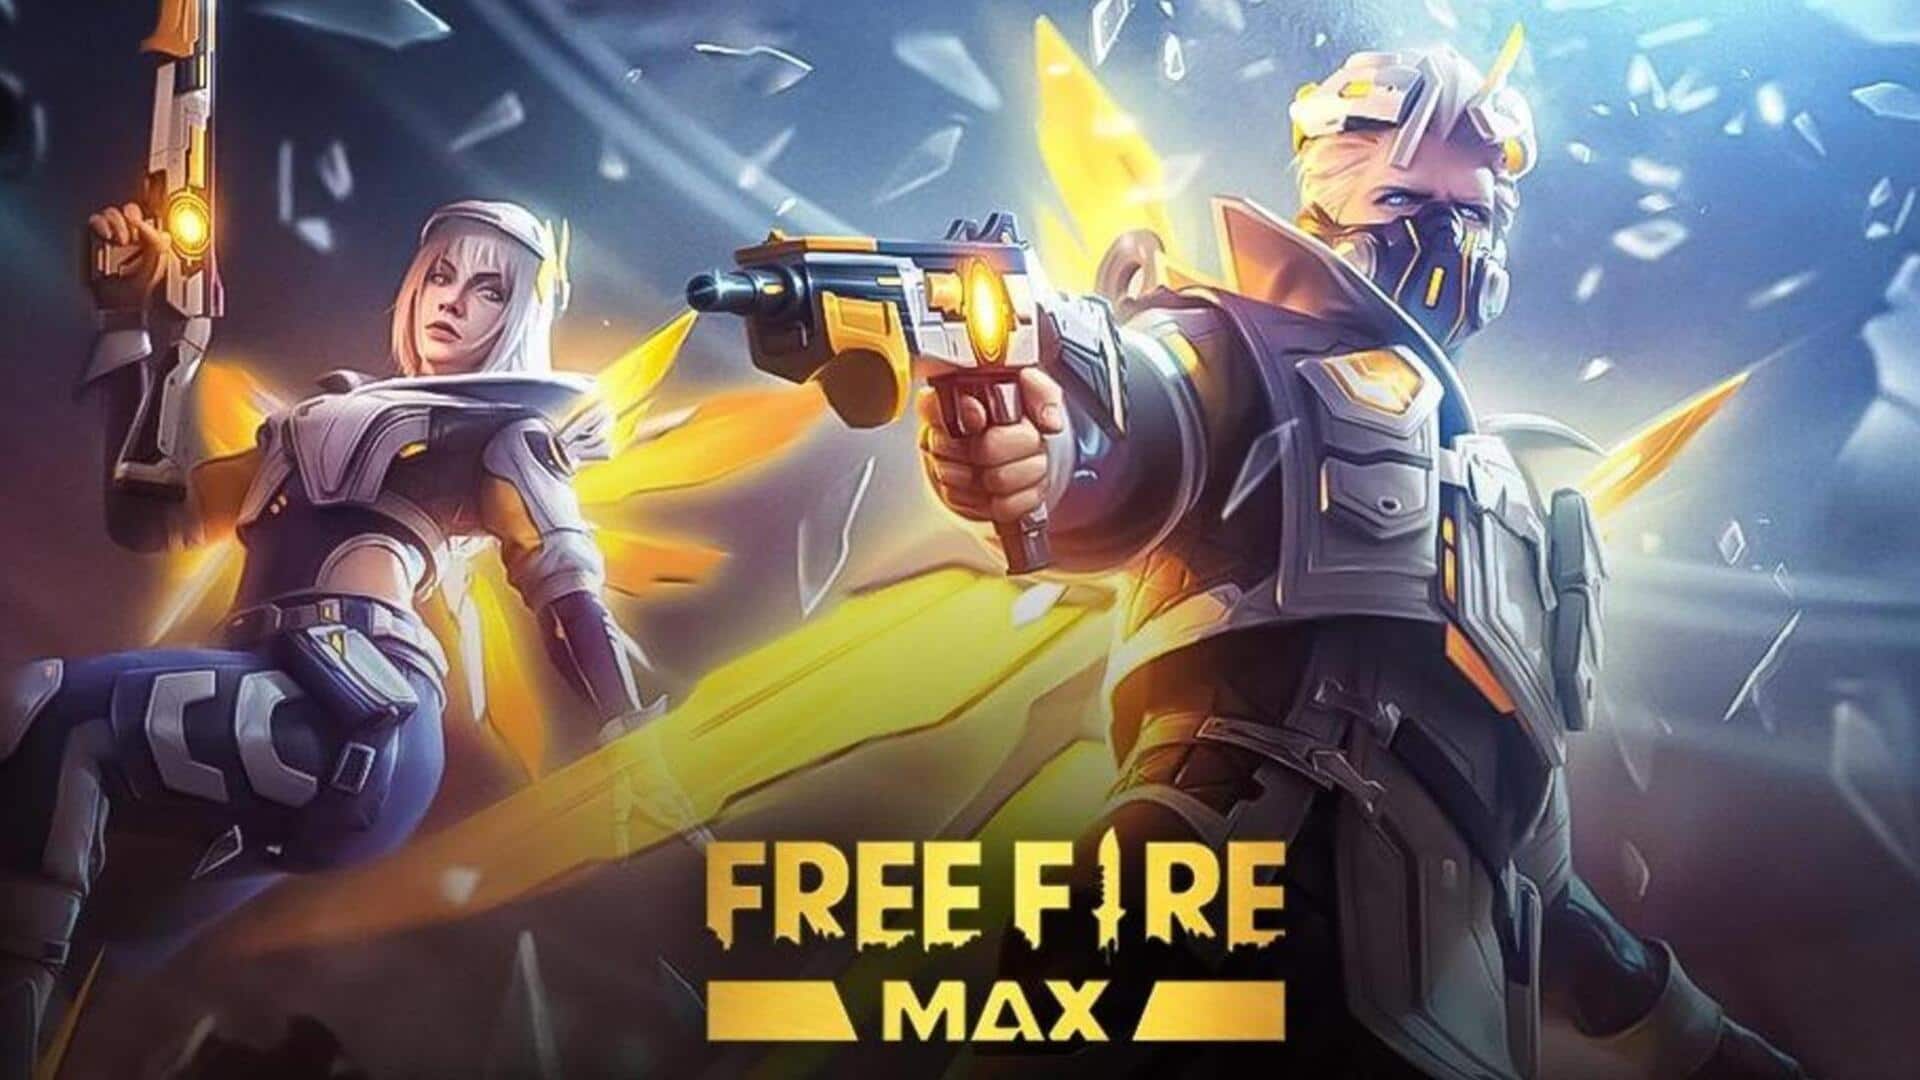 Free Fire MAX codes for September 27: How to redeem